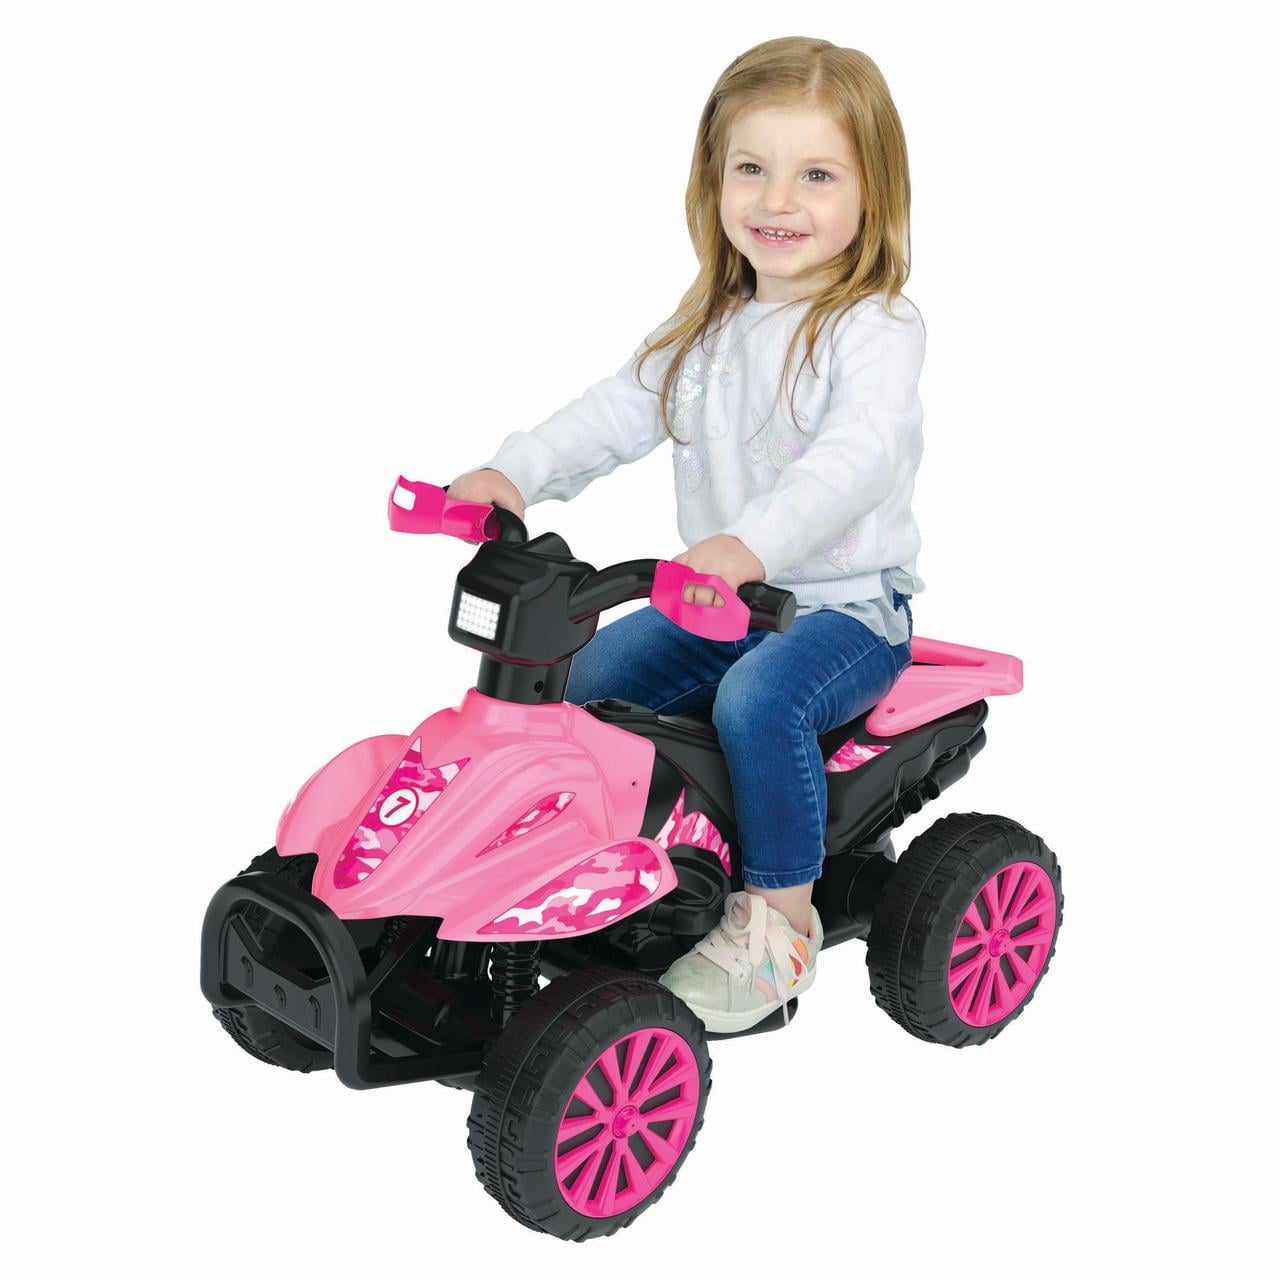 Kid Motorz Lil' Patrol 6-Volt Battery-Powered Ride-On Purple and Pink 